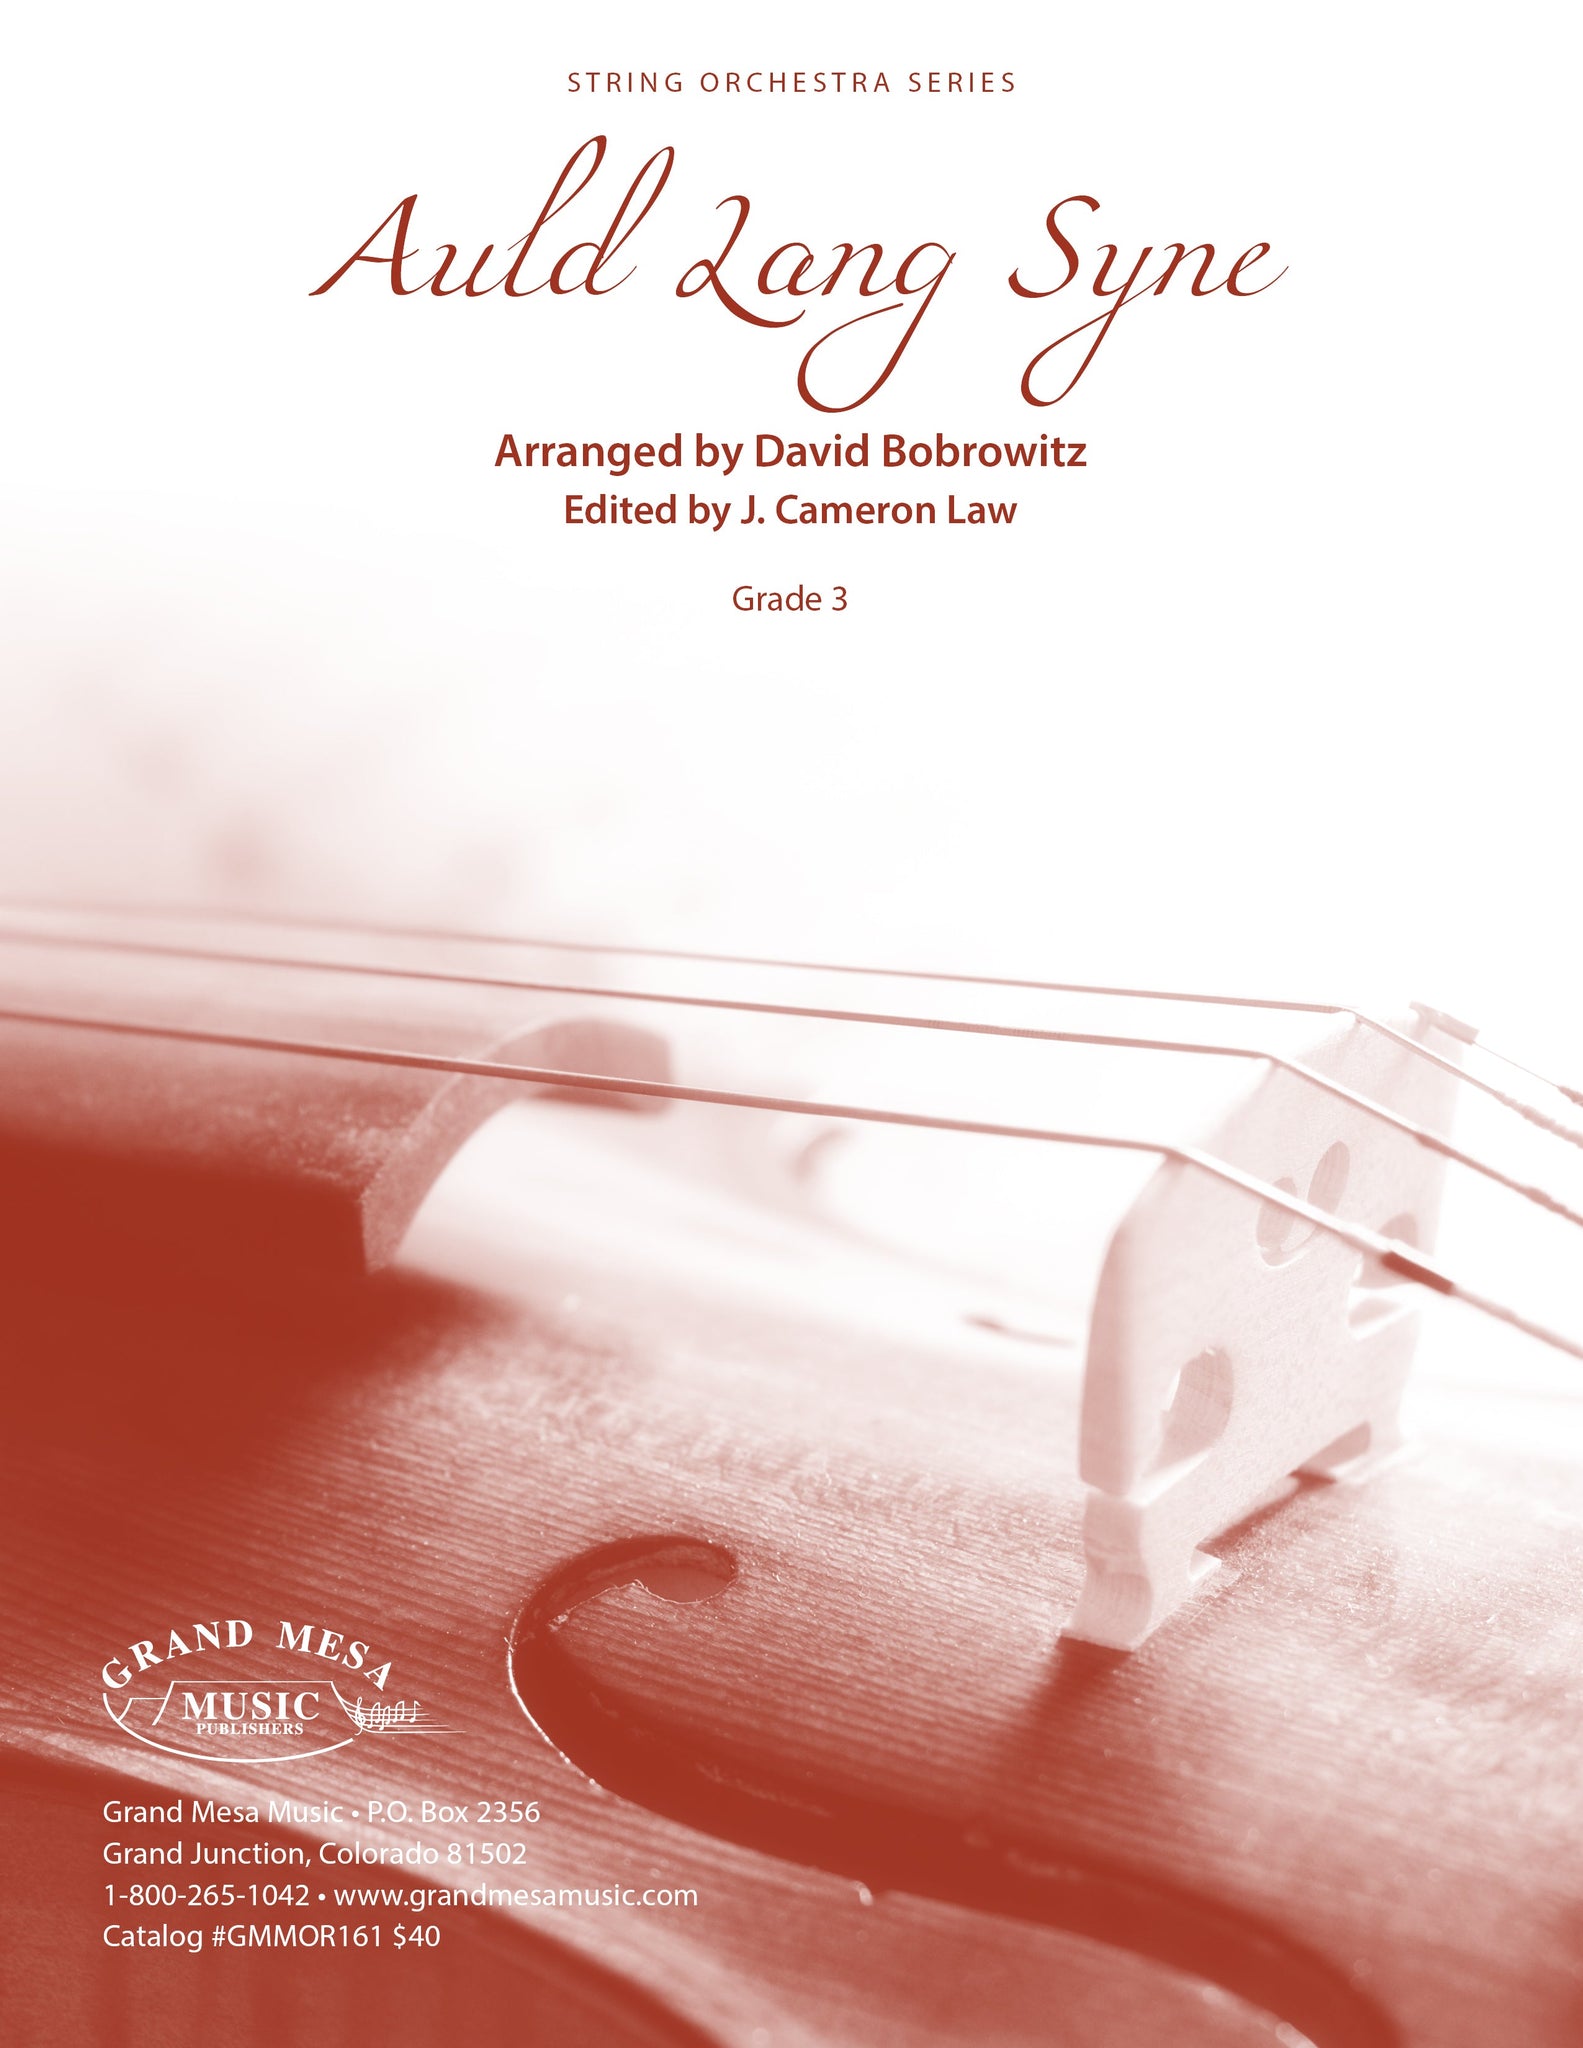 Strings sheet music cover of Auld Lang Syne, arranged by David Bobrowitz.